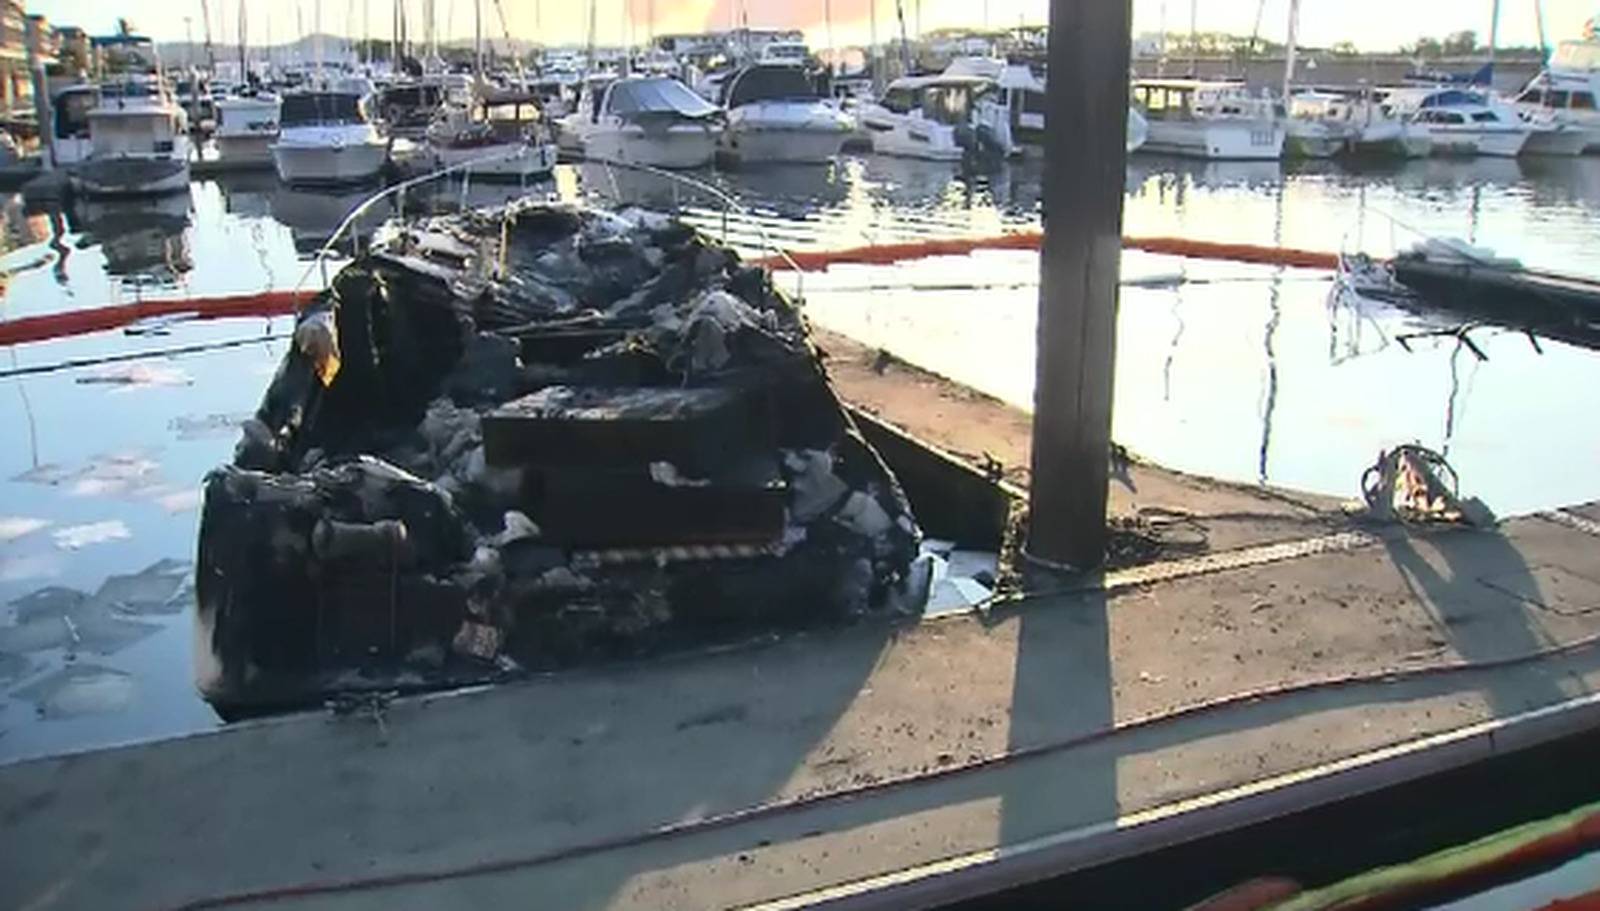 Image of boat at marina with fire damage